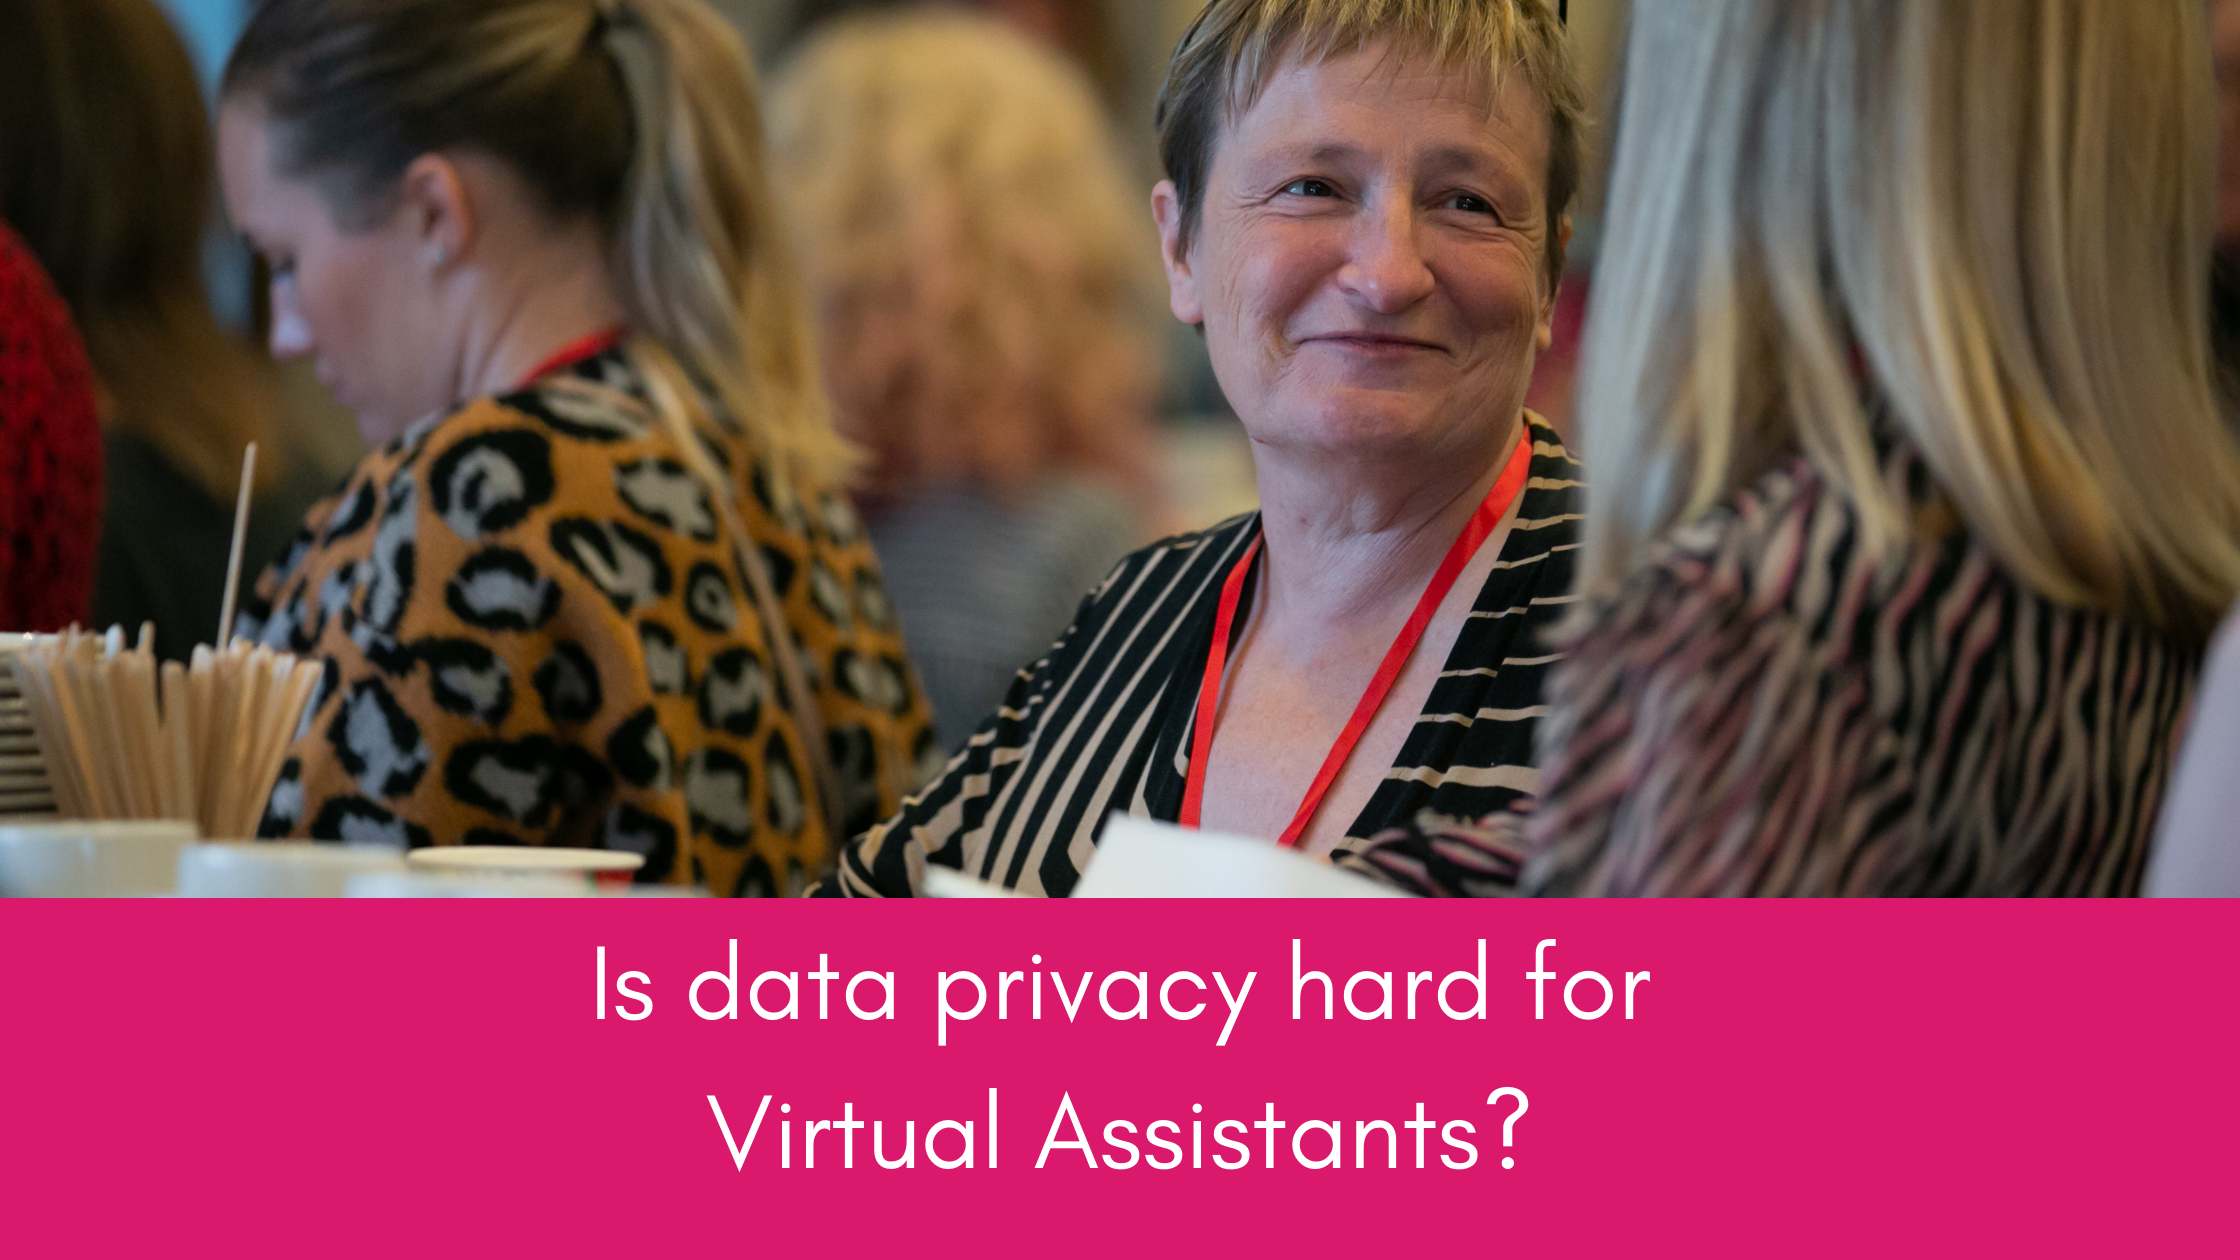 Is data privacy hard for Virtual Assistants?